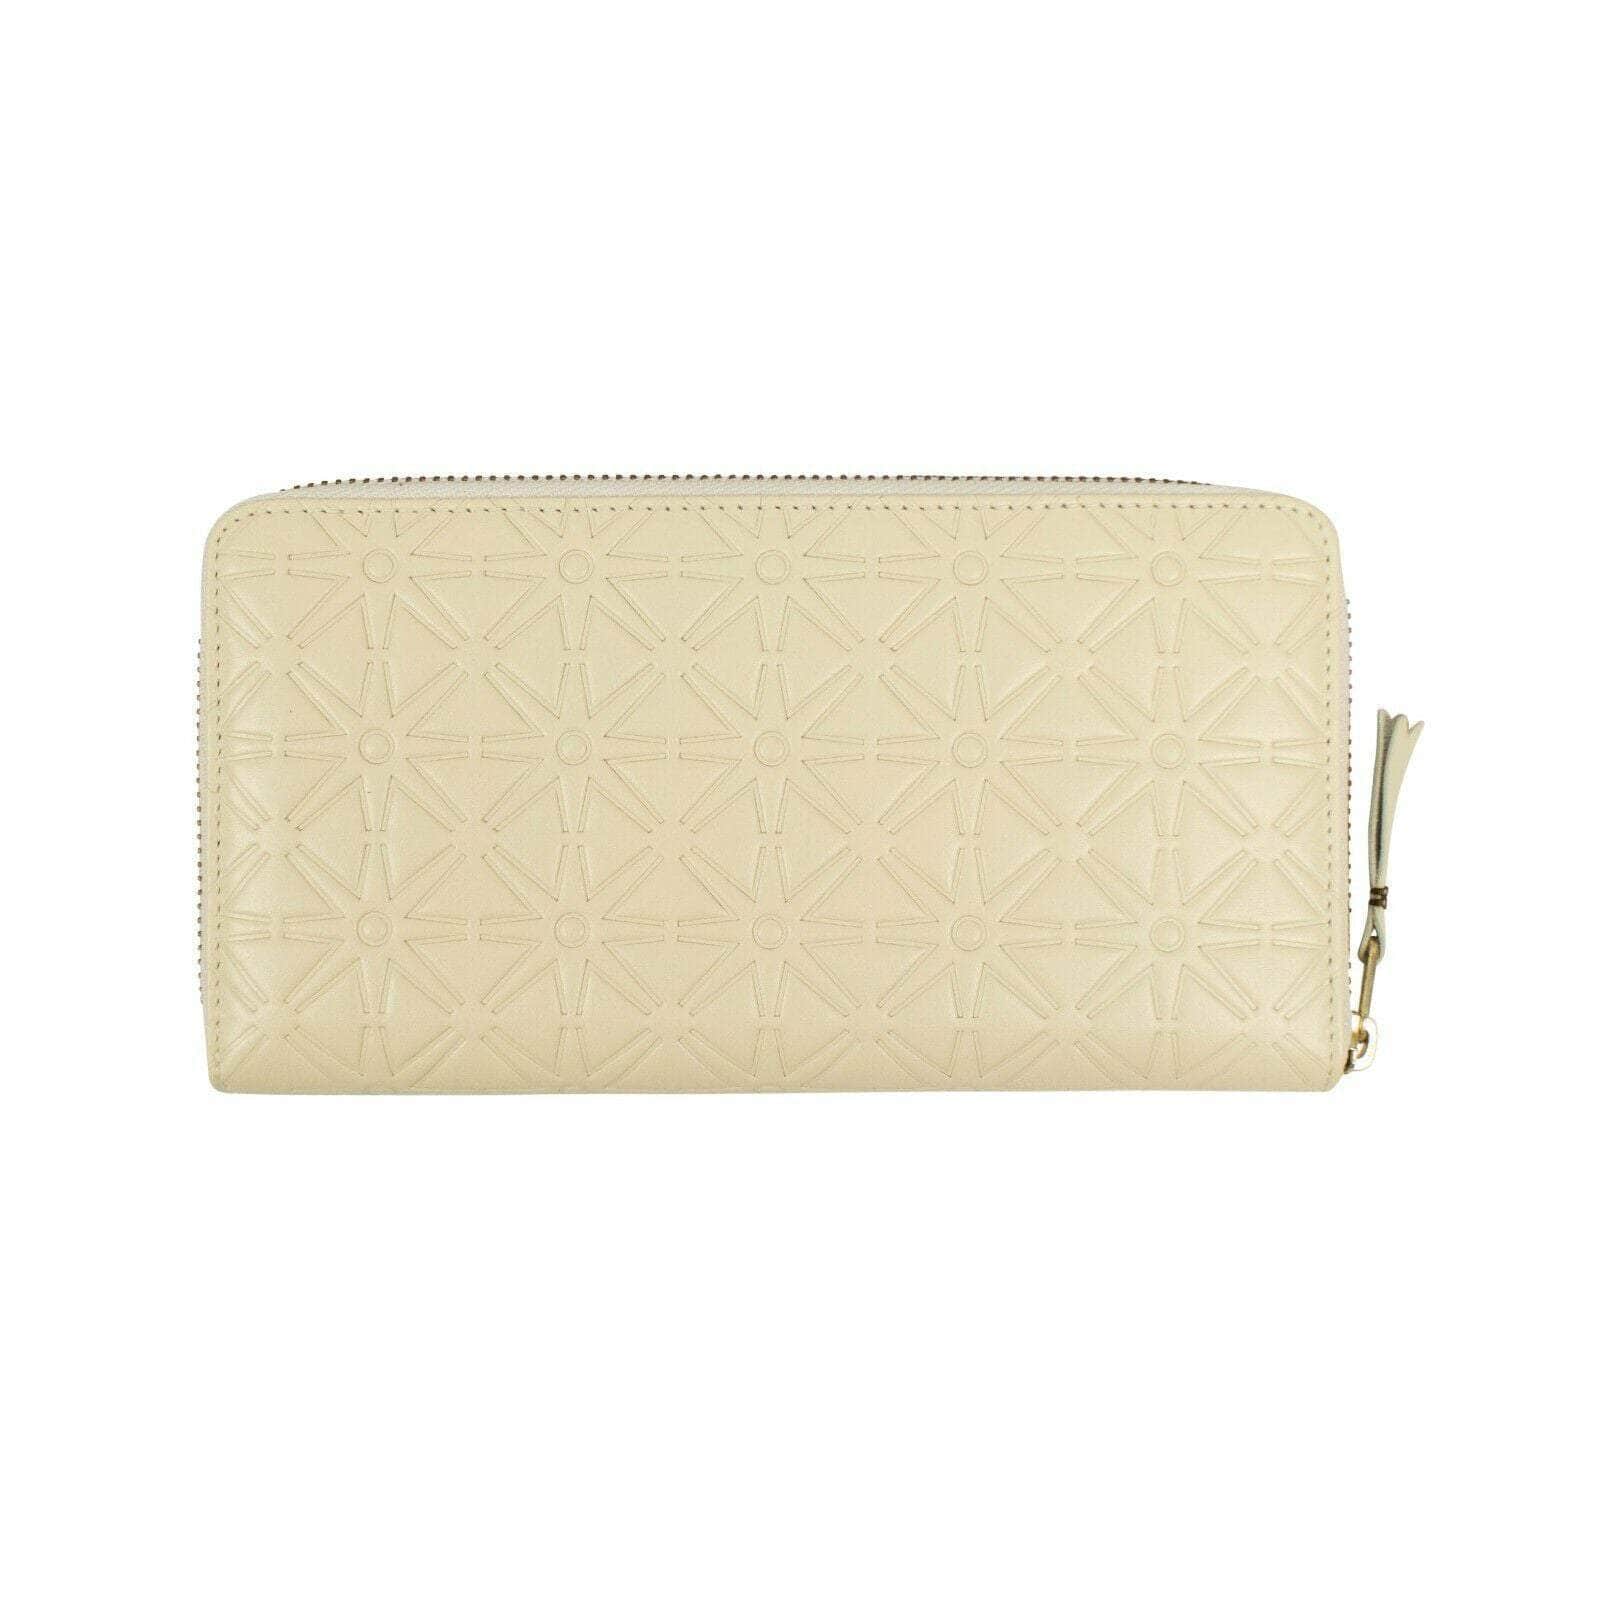 Comme Des Garcons Wallets O/S Leather Star Embossed Wallet - Cream 69LE-4017 69LE-4017